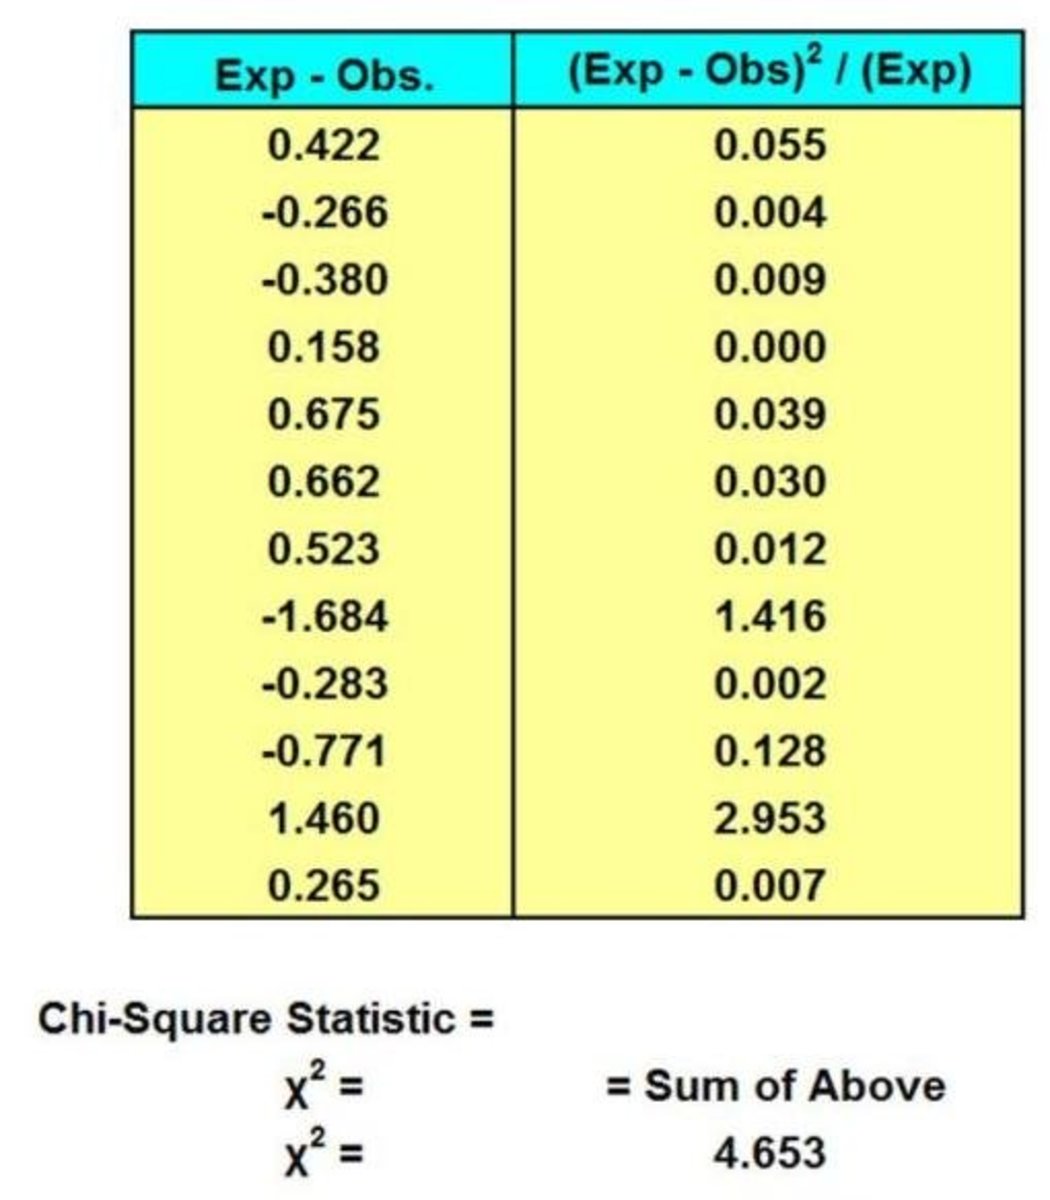 Excel Calculations of the Chi-Square Statistic